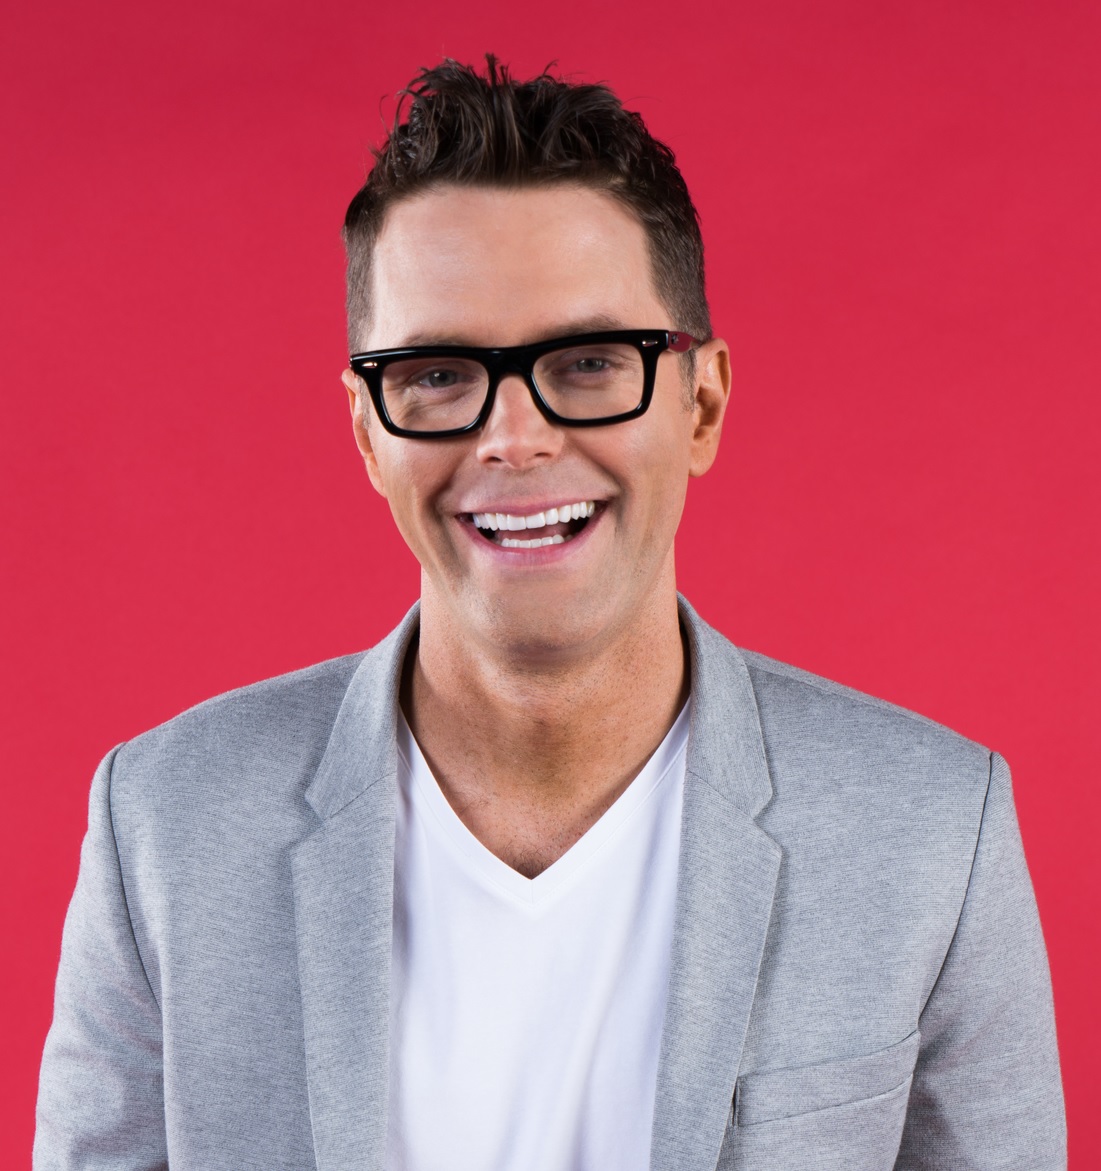 WAMZ/Louisville Adds 'The Bobby Bones Show' For Mornings.